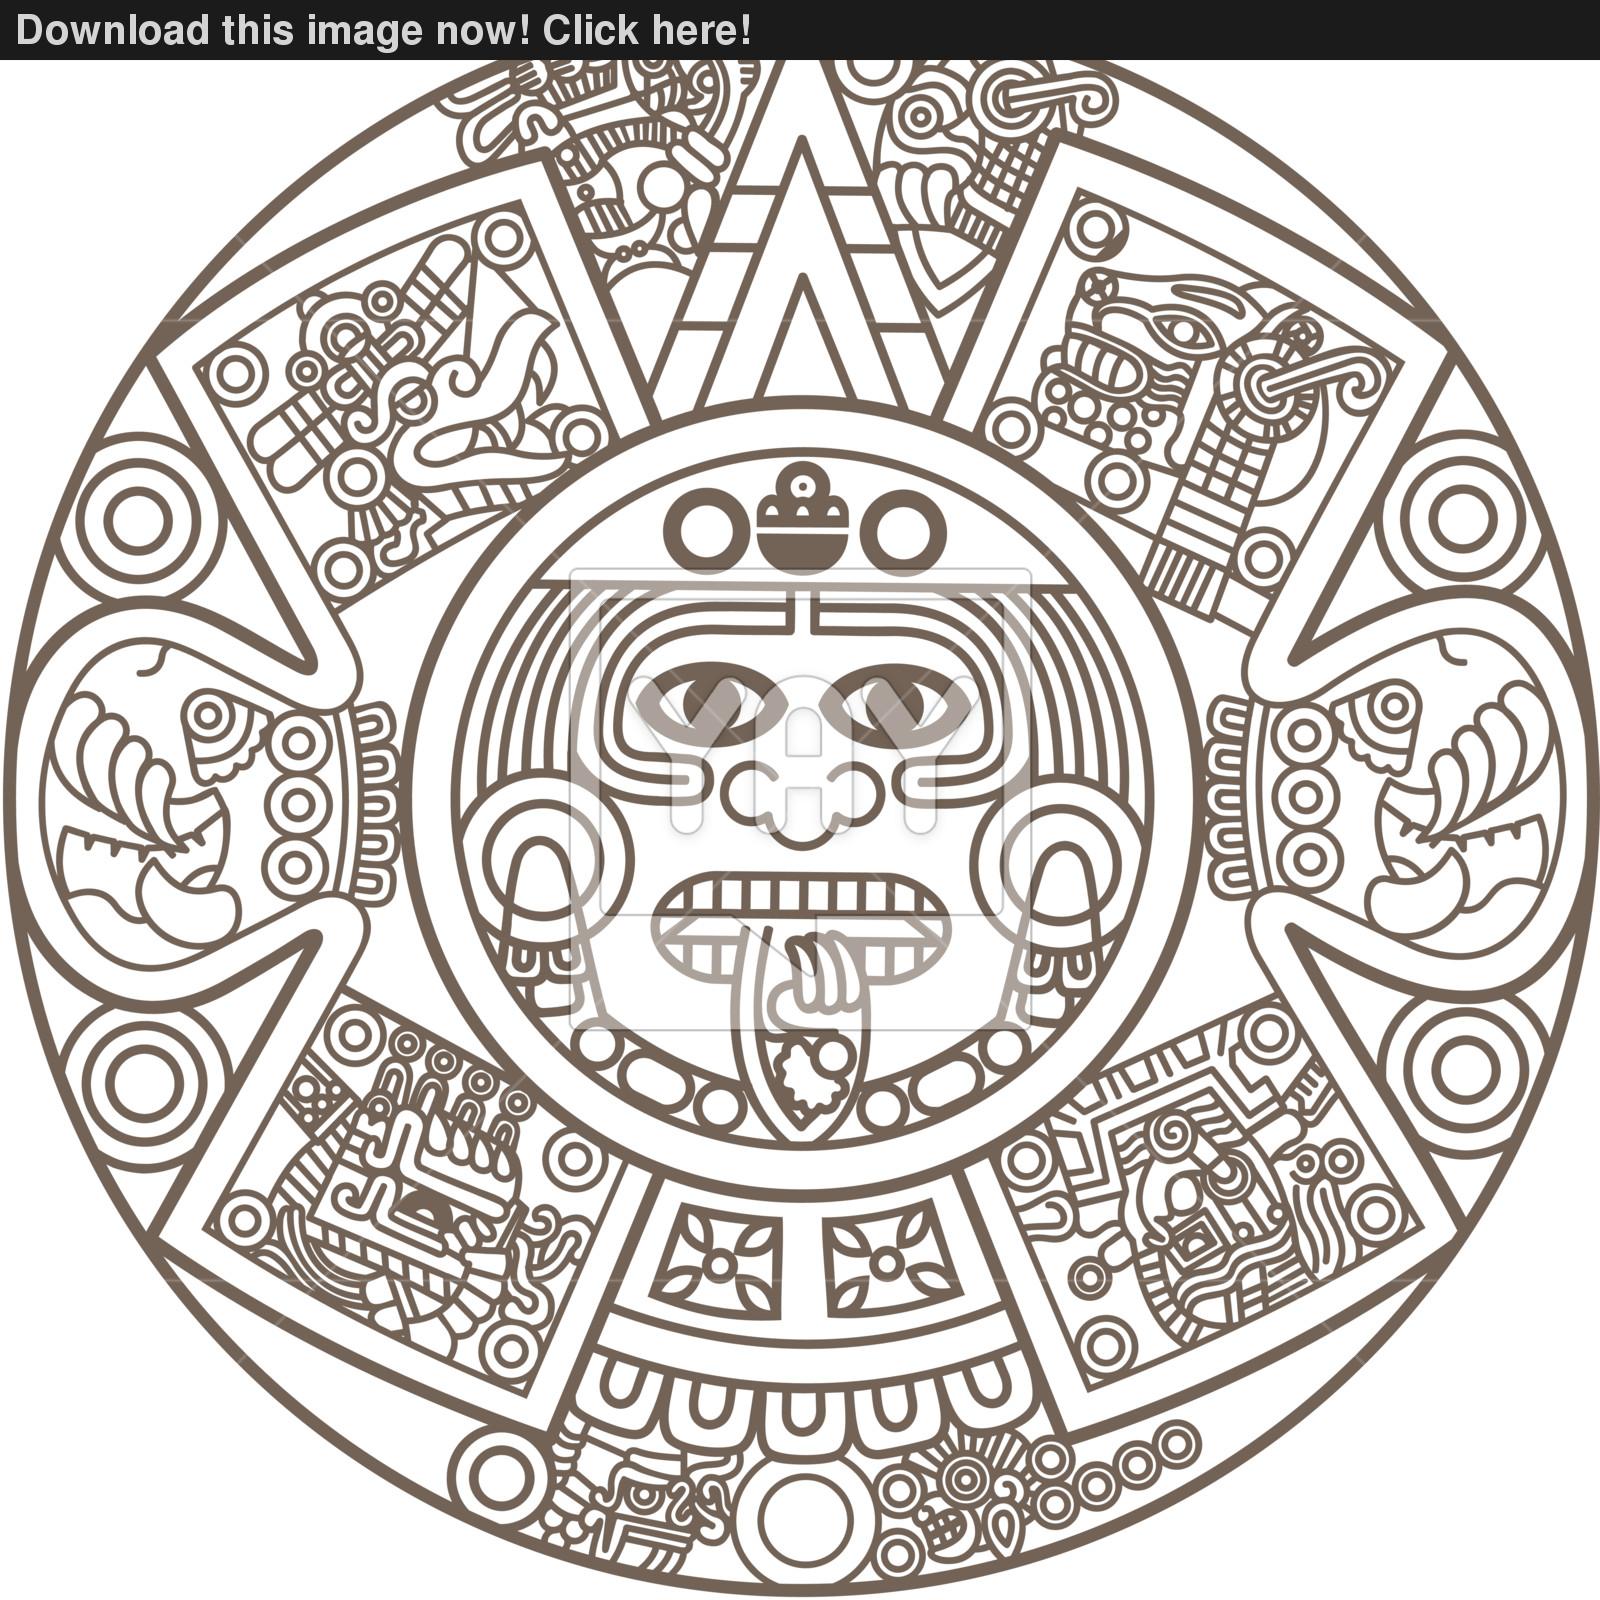 Aztec Calendar Drawing at GetDrawings com Free for personal use Aztec